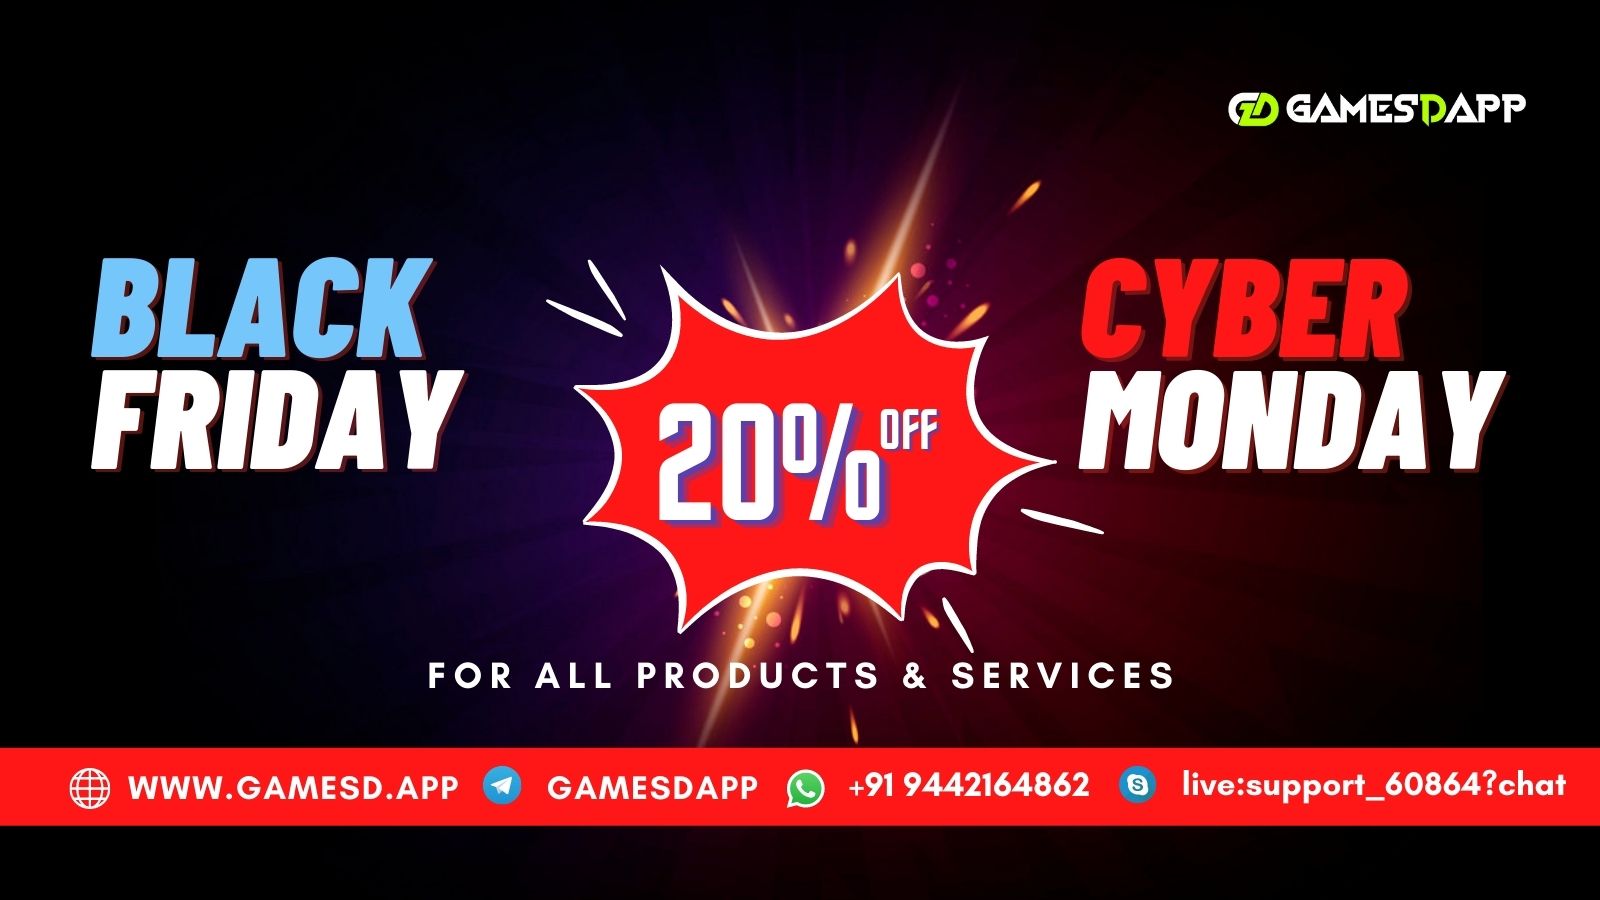 Black Friday & Cyber Monday Offers 2021: Upto 20% OFF on All Services From GamesDapp